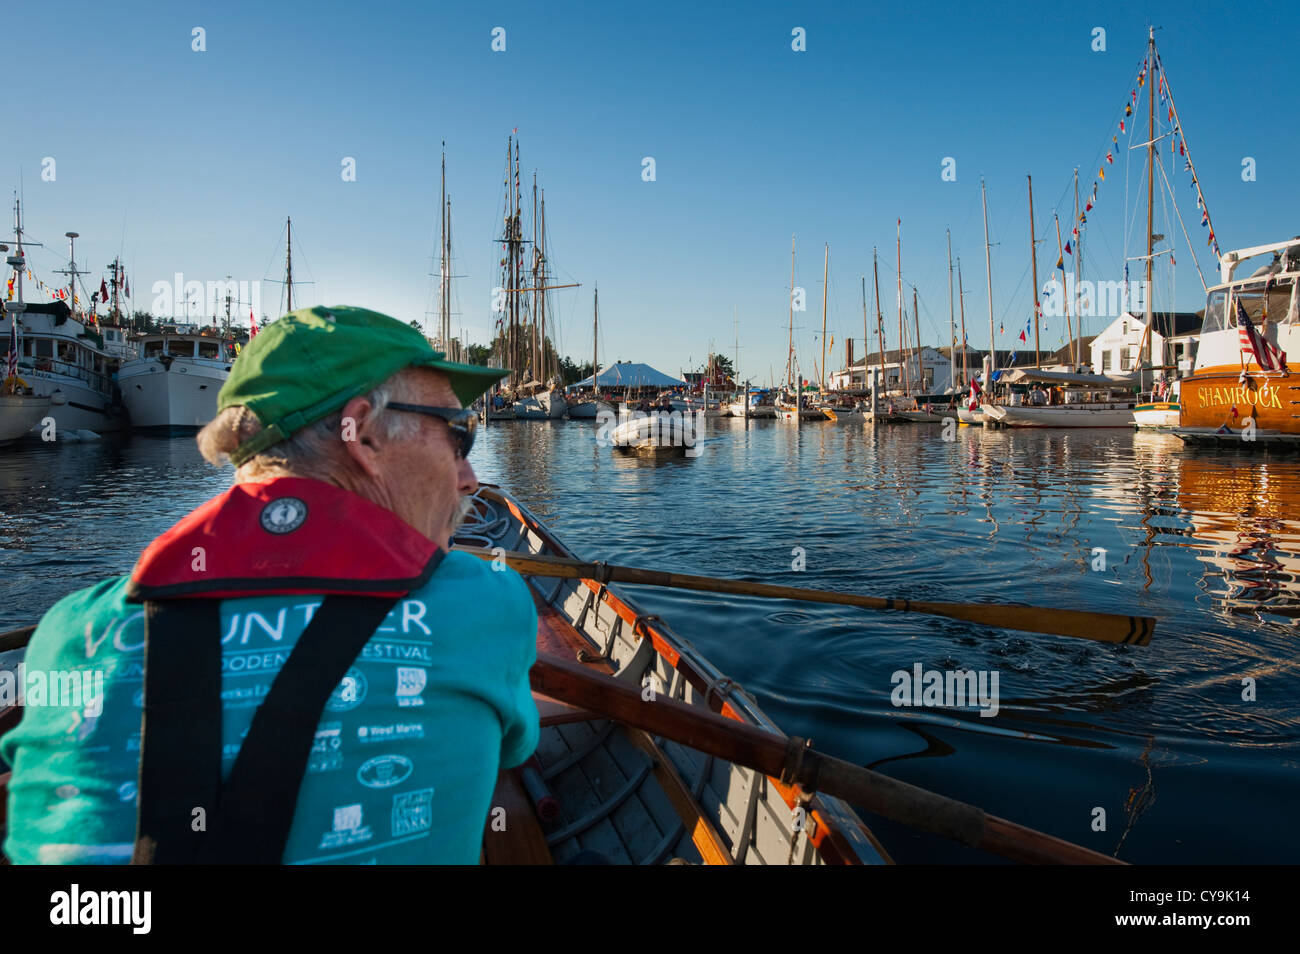 Taking a rowboat through the Port Townsend Wooden Boat Festival in Washington State, USA. Stock Photo